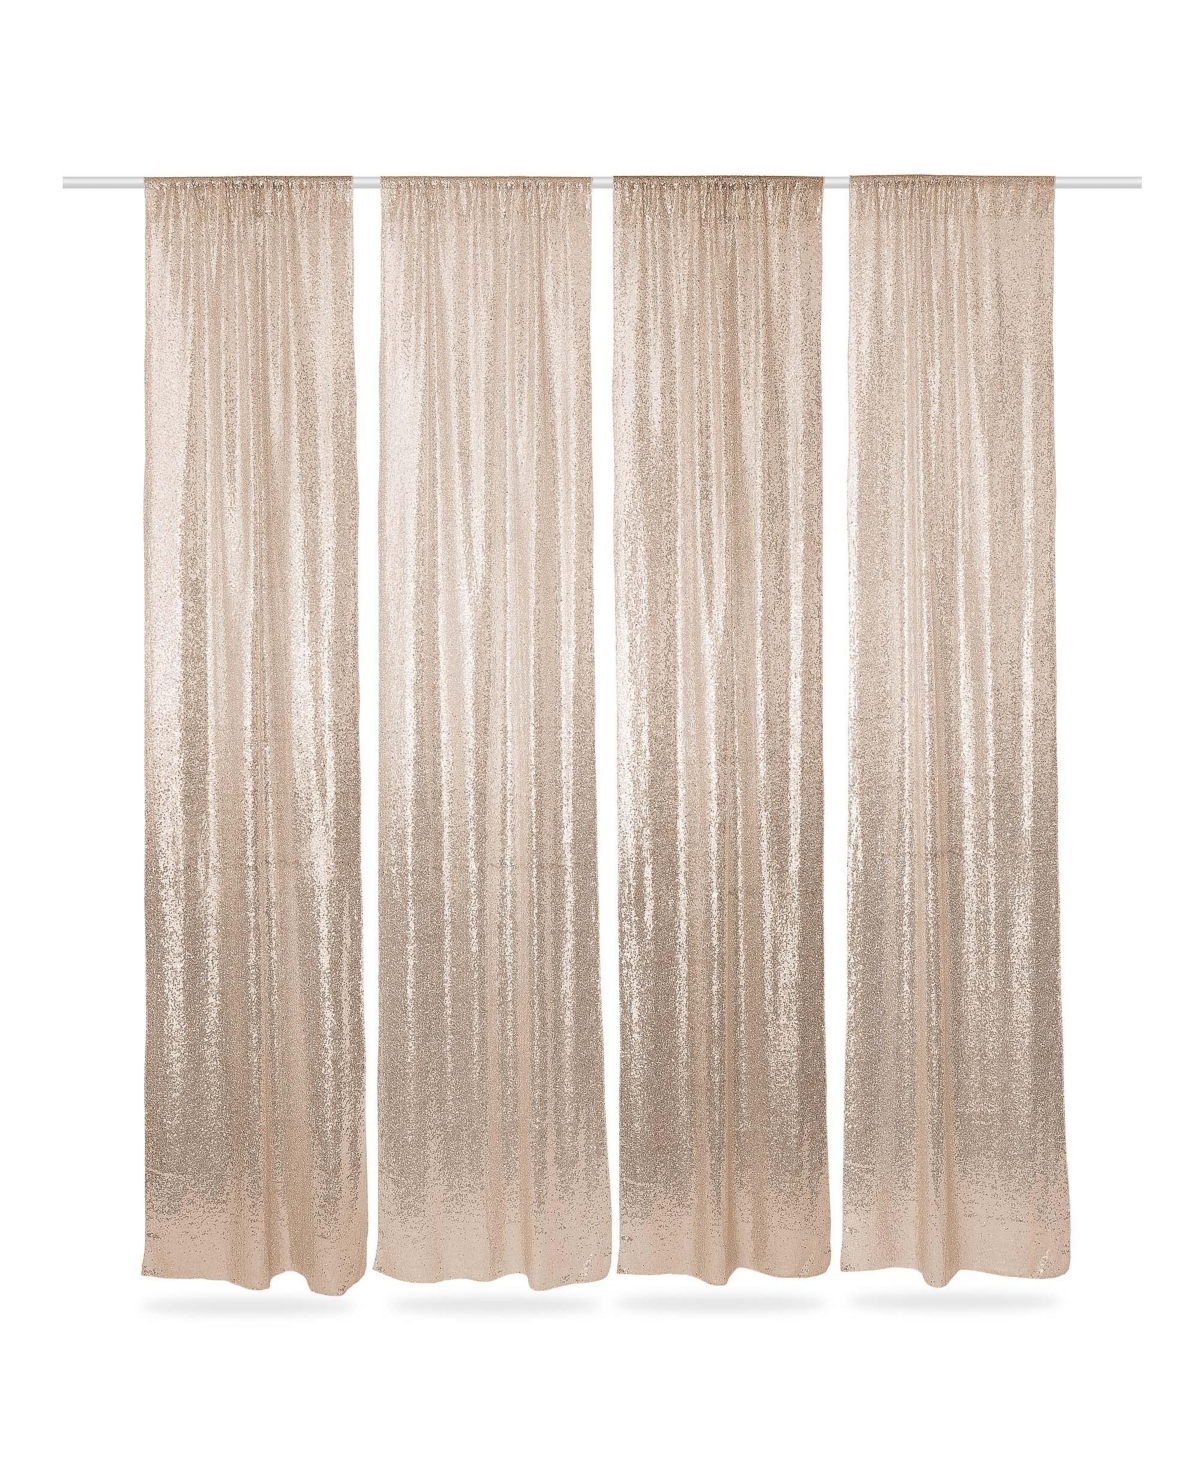 (Set of 4) Sequin Backdrop Curtains, 2ft x 8ft Gold Glitter Backgrounds - Rose gold